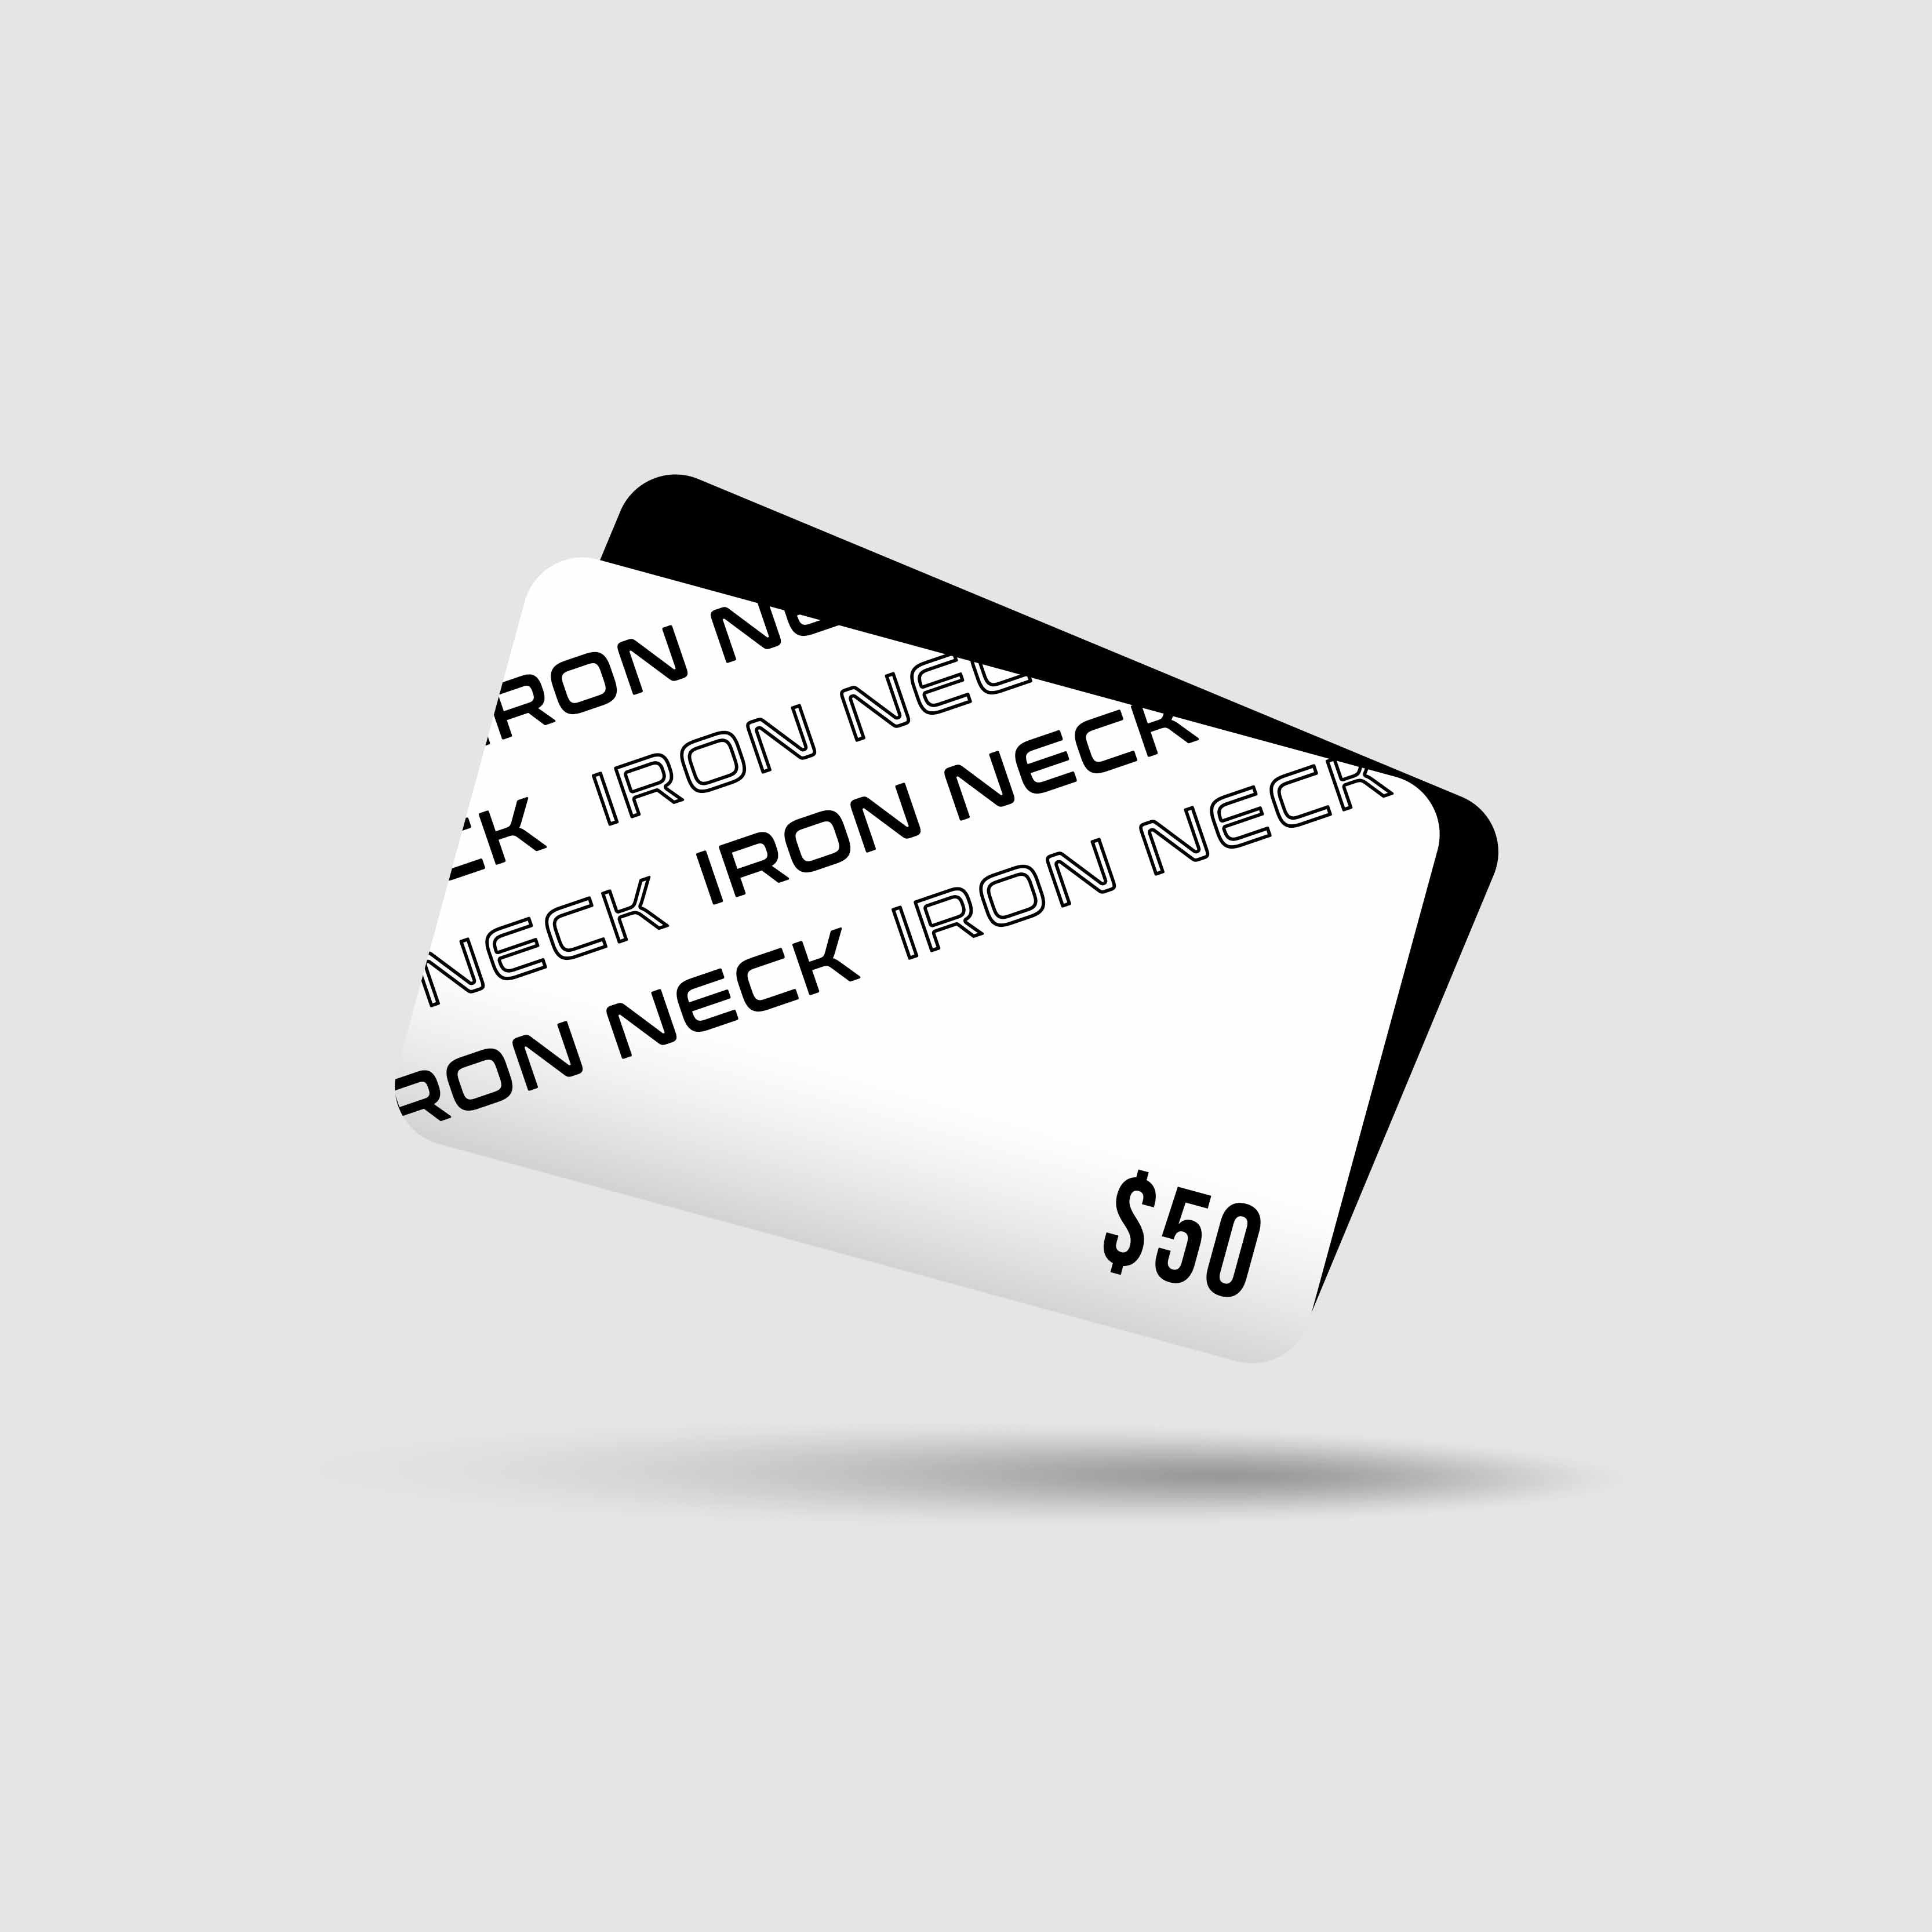 Gift Card Gift Card Iron Neck $50  